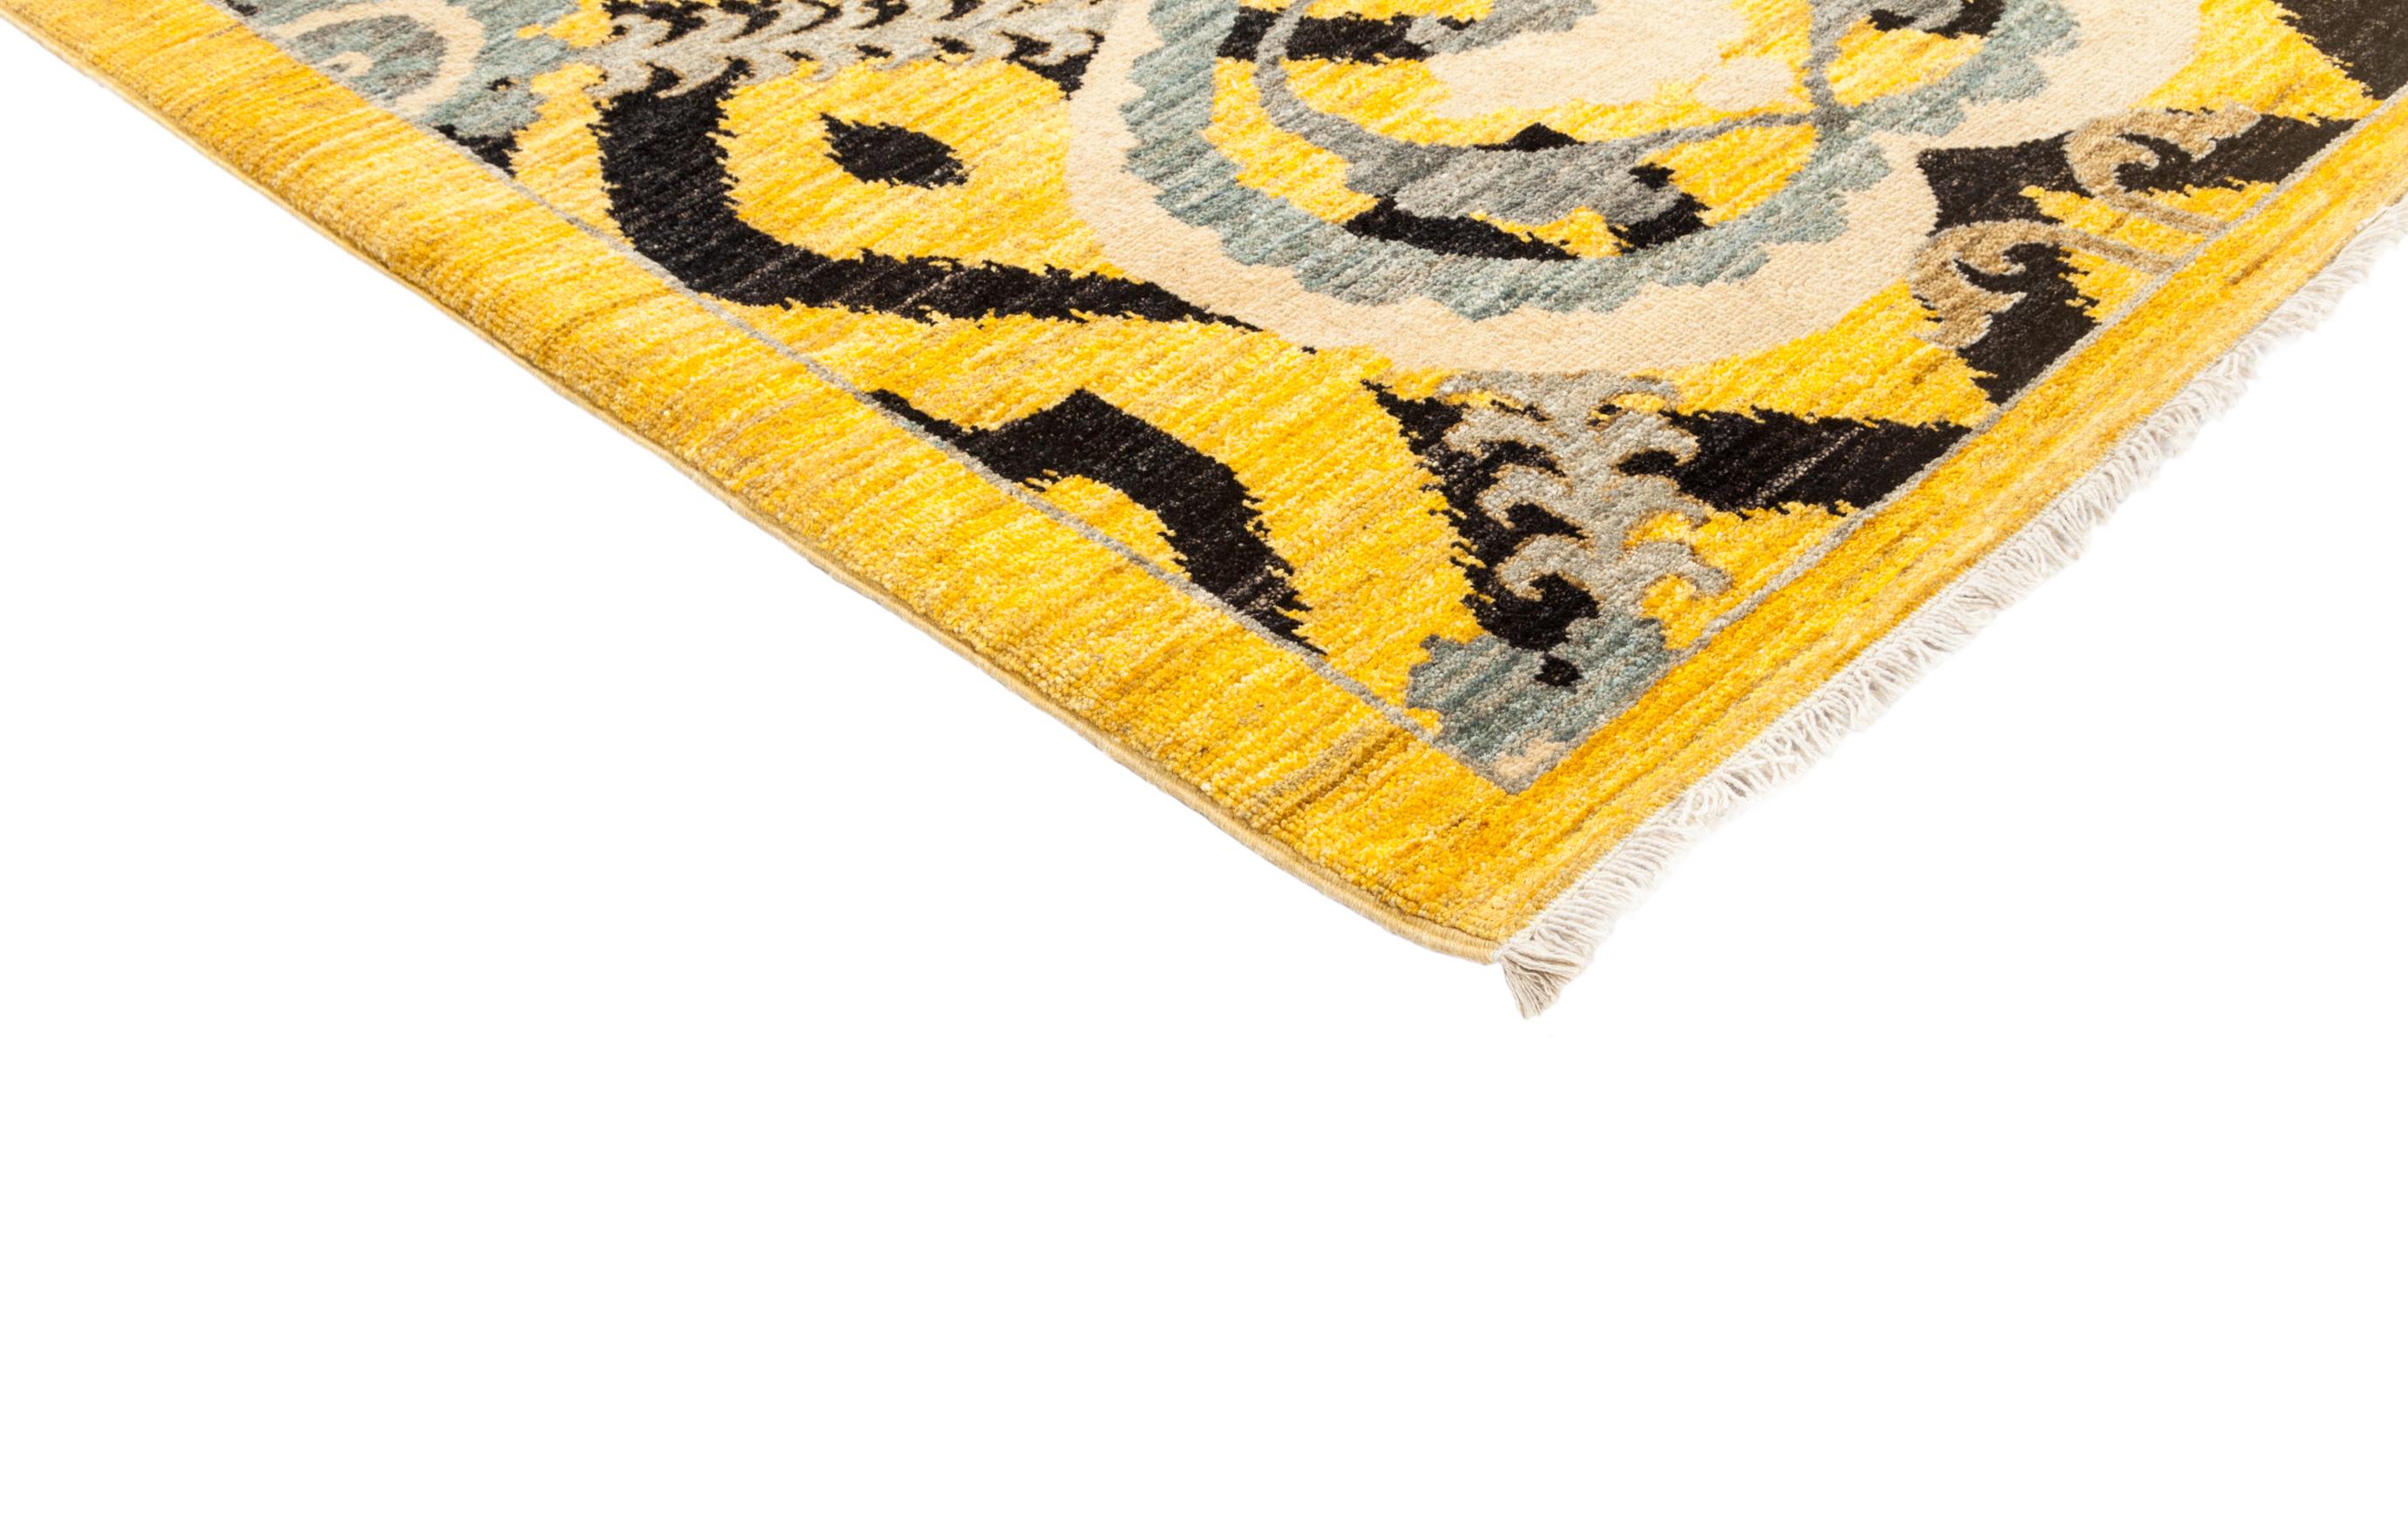 Color: Yellow - Made In: Pakistan. 100% Wool. Whether boasting a field of flowers or ancient tribal symbols, patterned rugs are the easiest way to enrich a space. Subtle colors and intricate motifs reinforce the quiet sophistication of a traditional